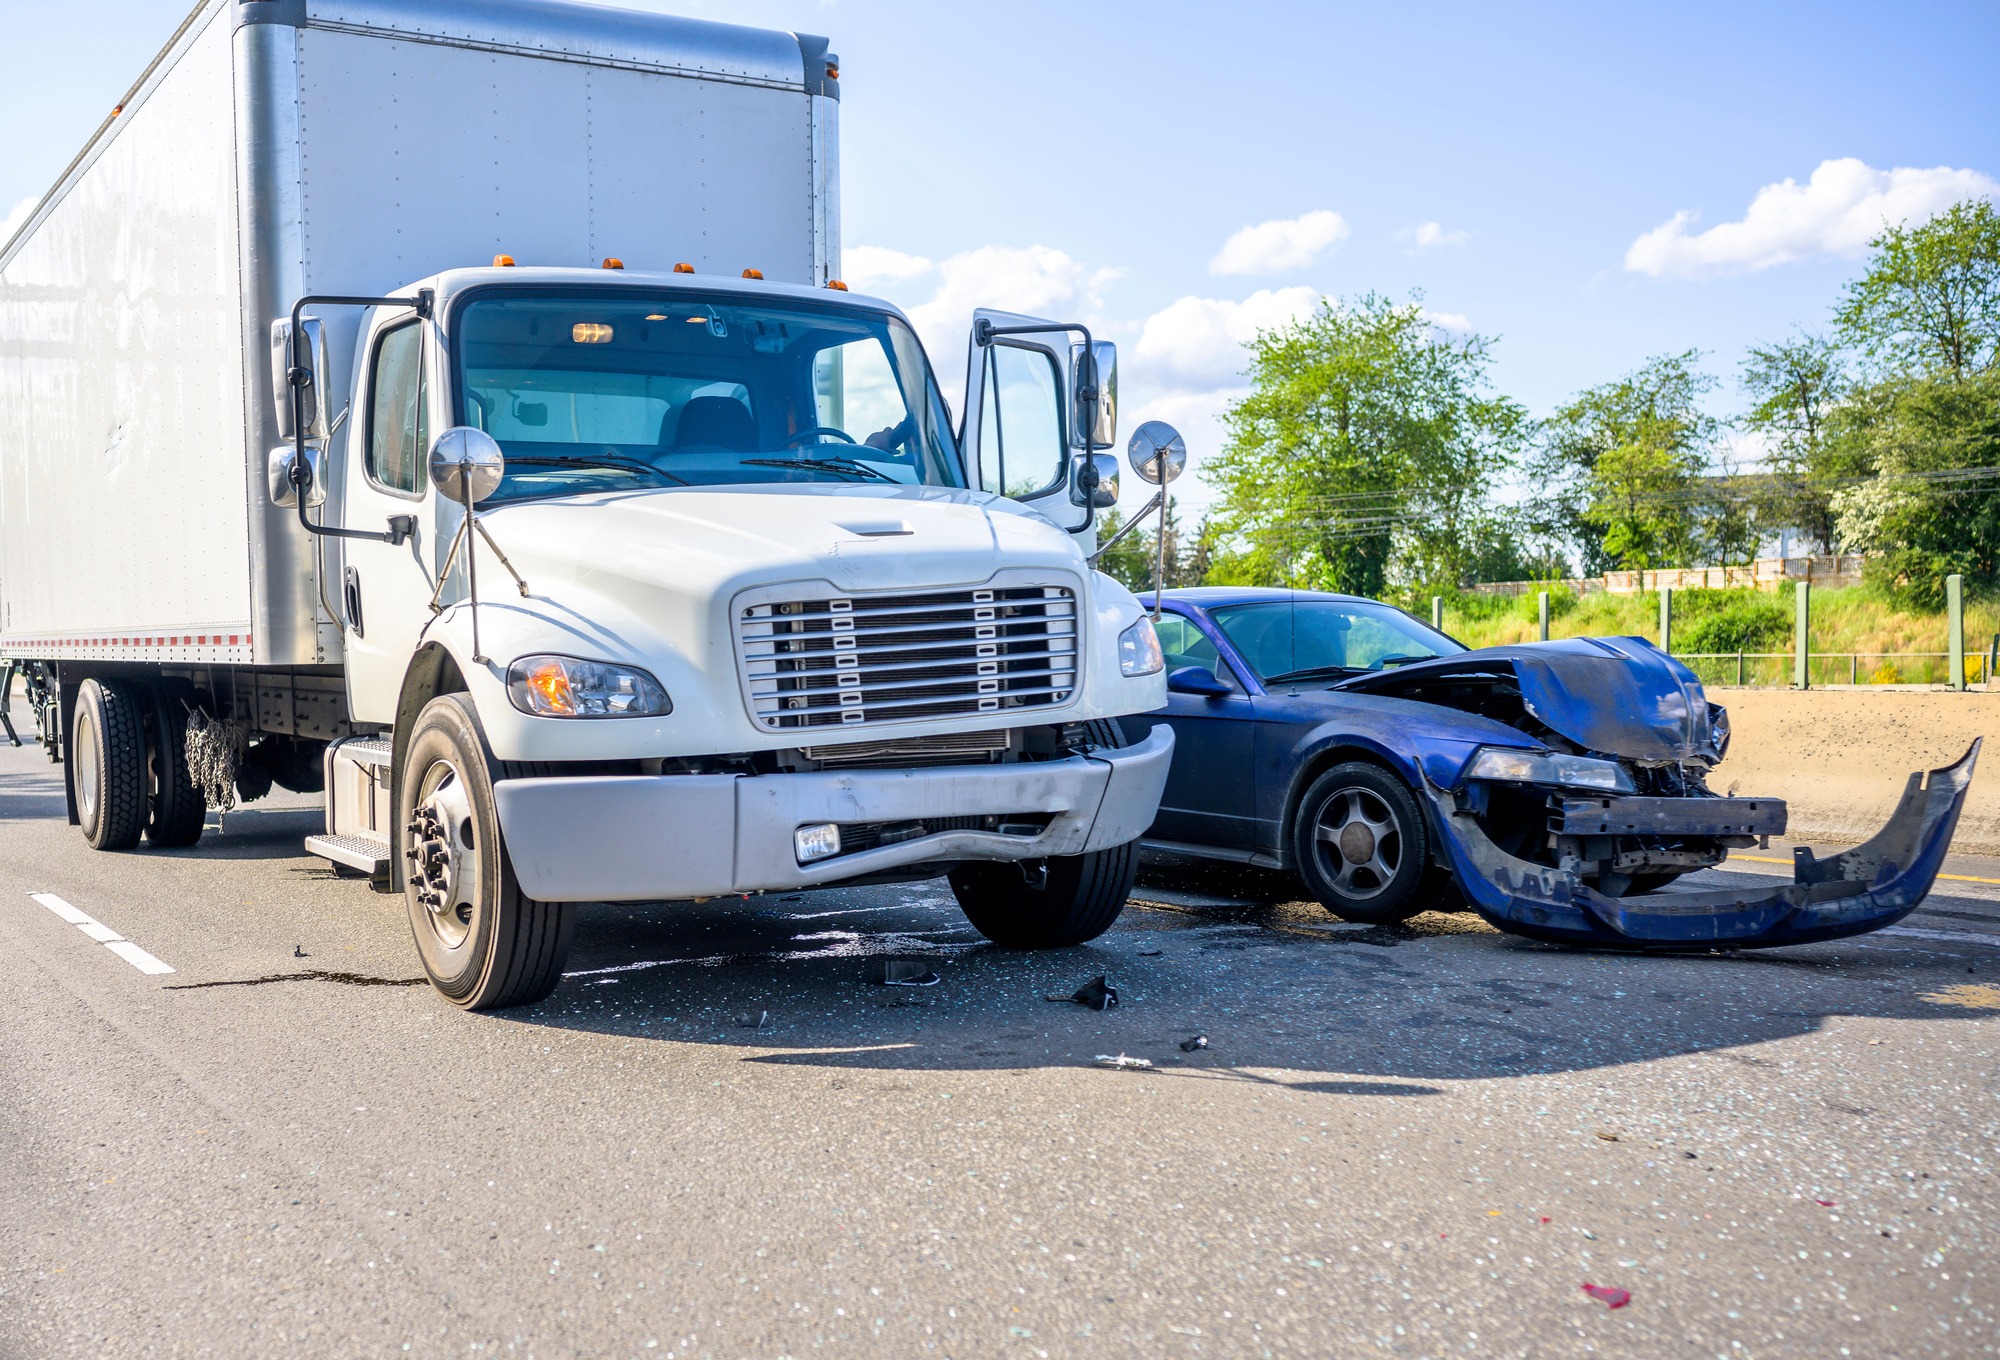 Road accident with damage to vehicles as a result of a collision